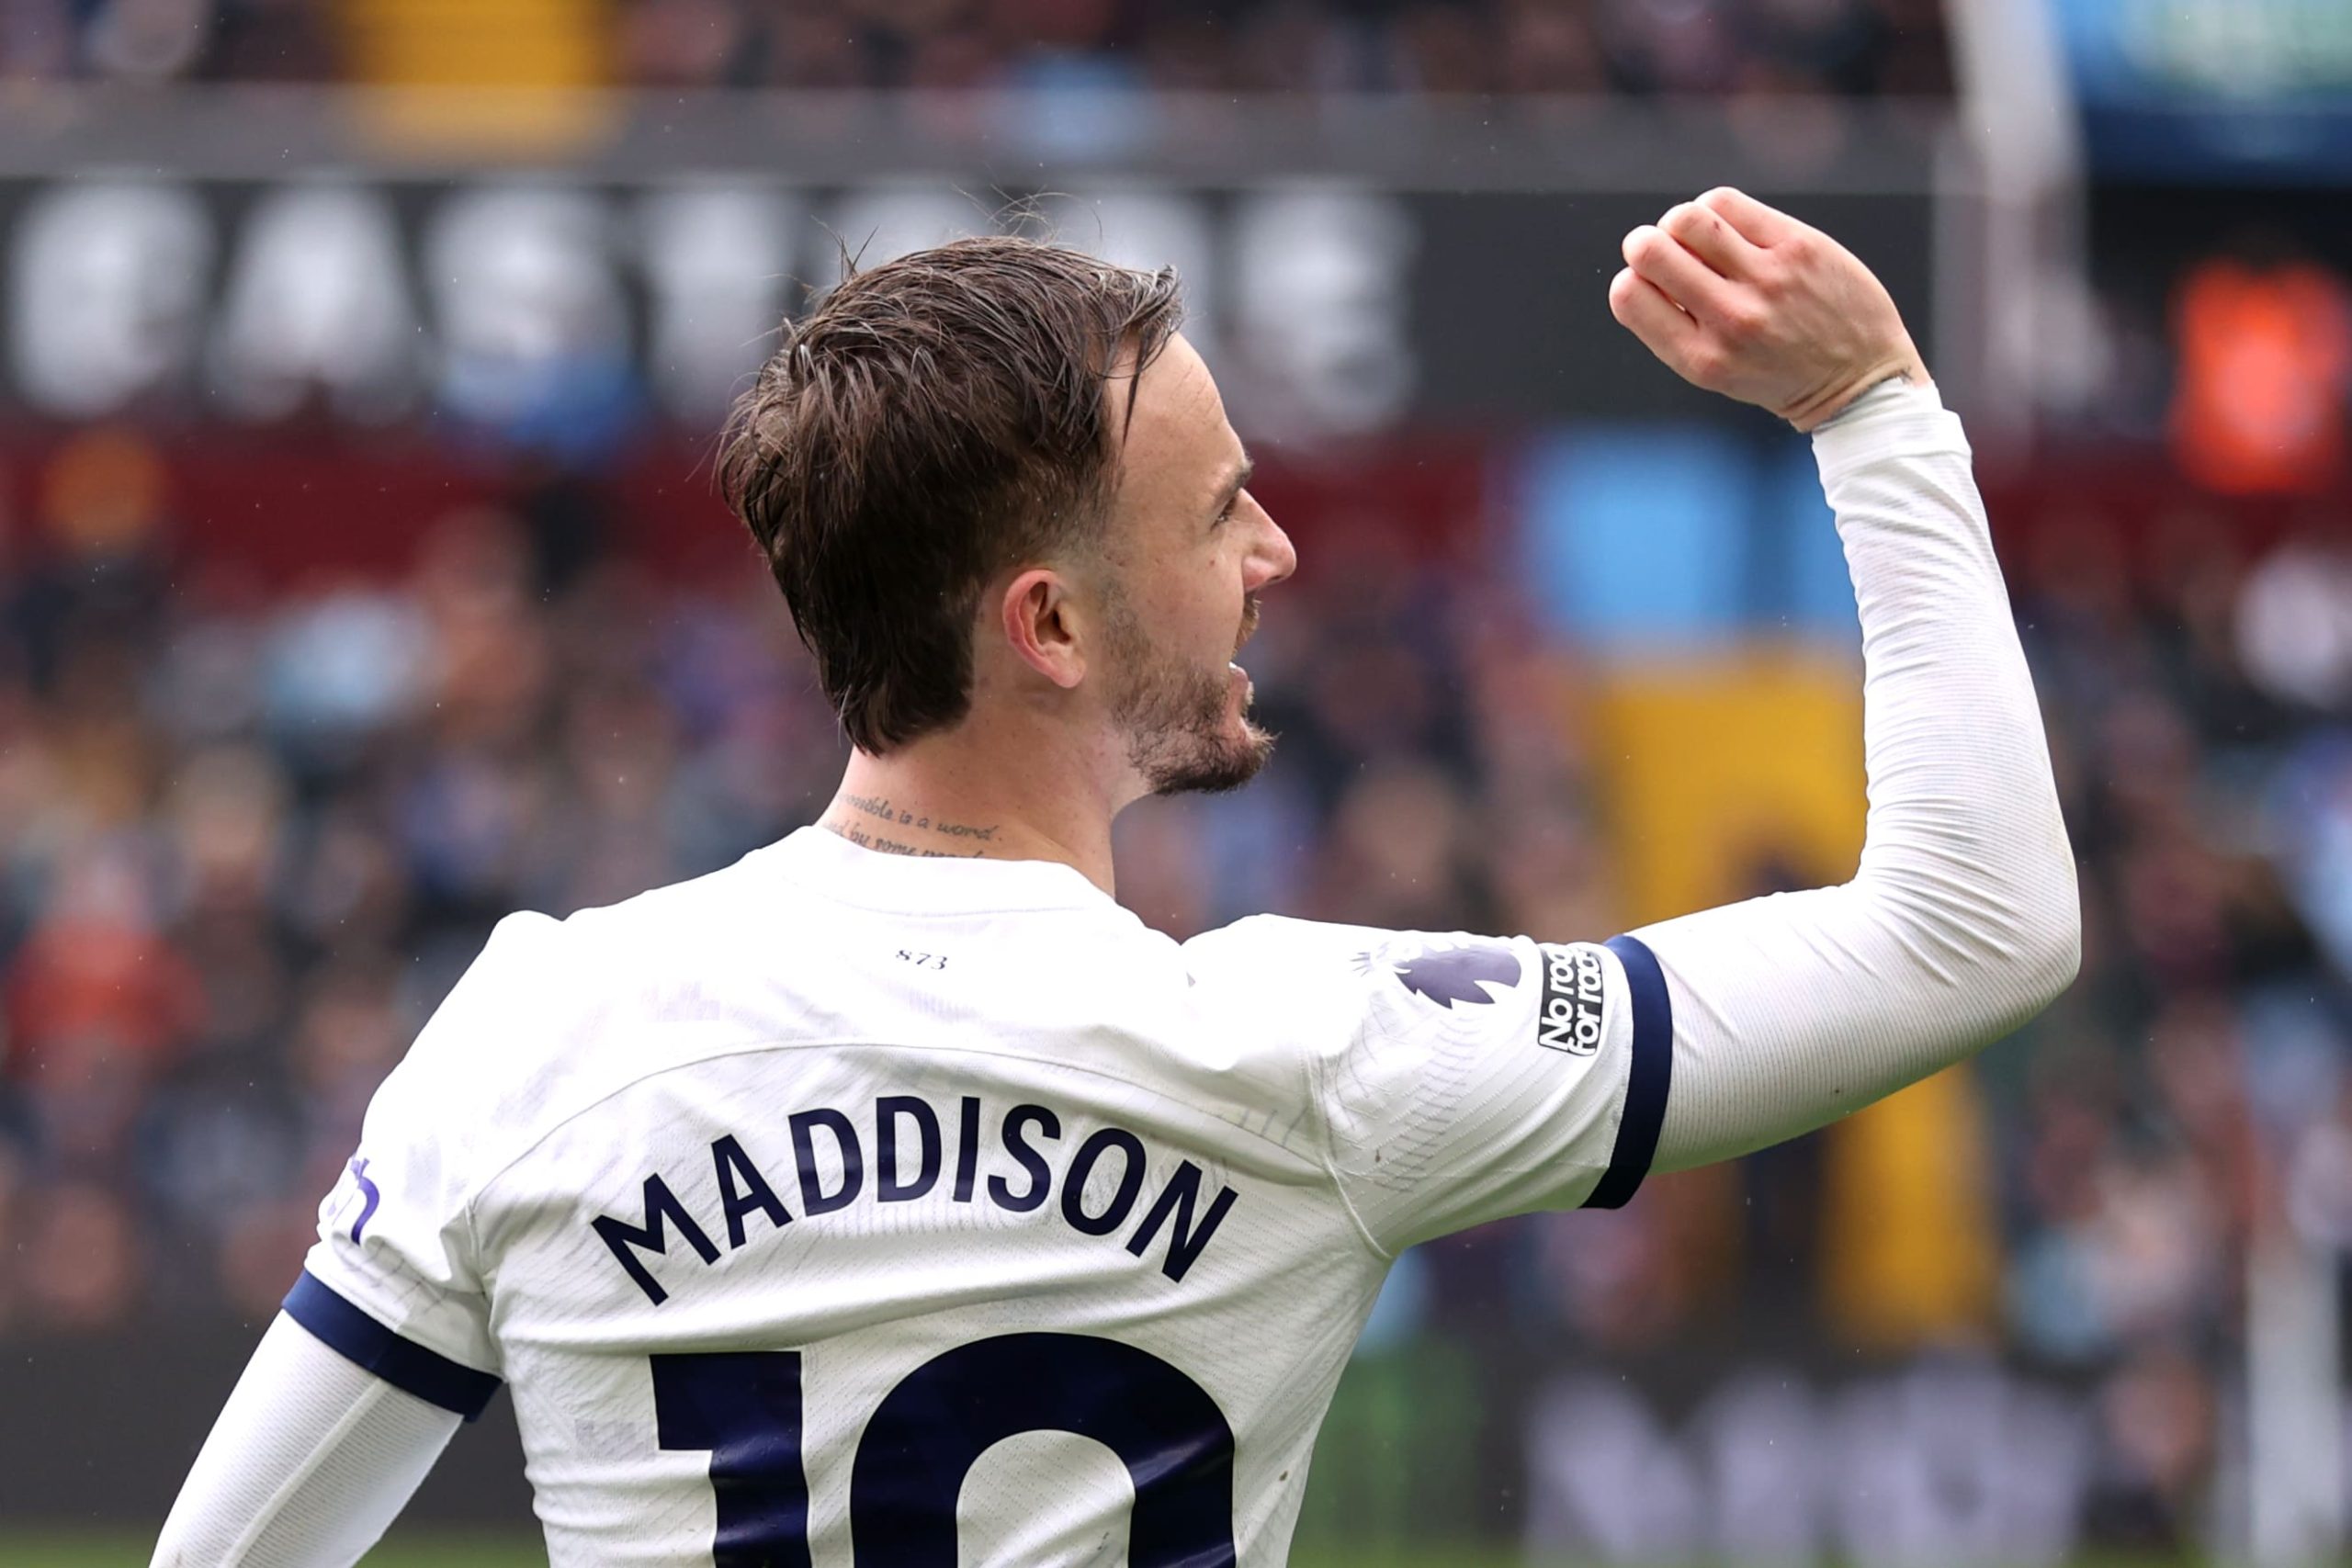 Tottenham will not be doing any favors in title race says James Maddison